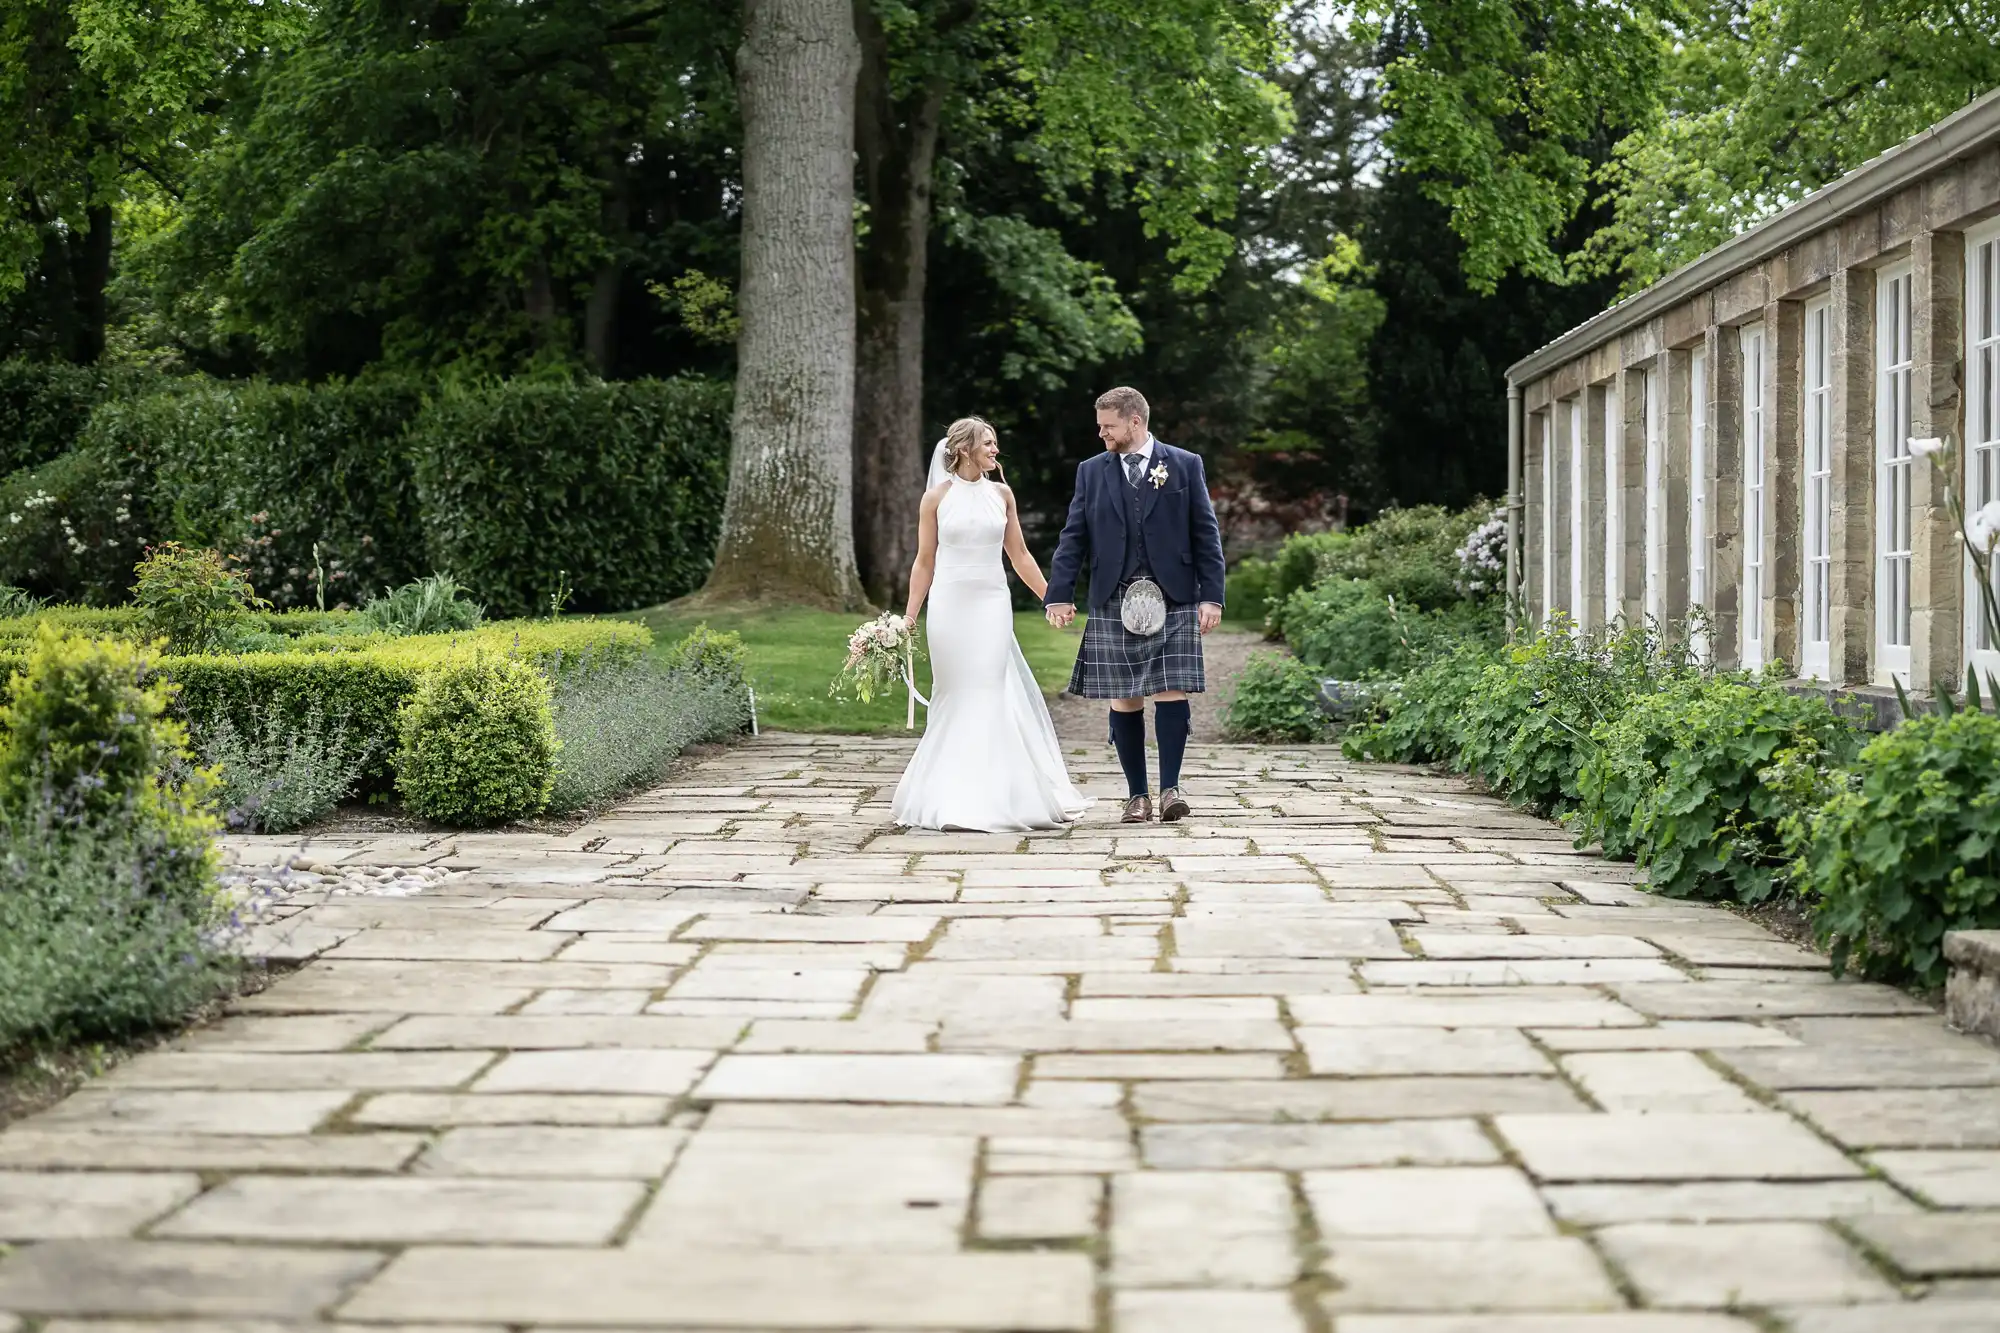 A bride and groom walk hand in hand along a stone pathway in a garden, with lush greenery and a classical structure in the background.